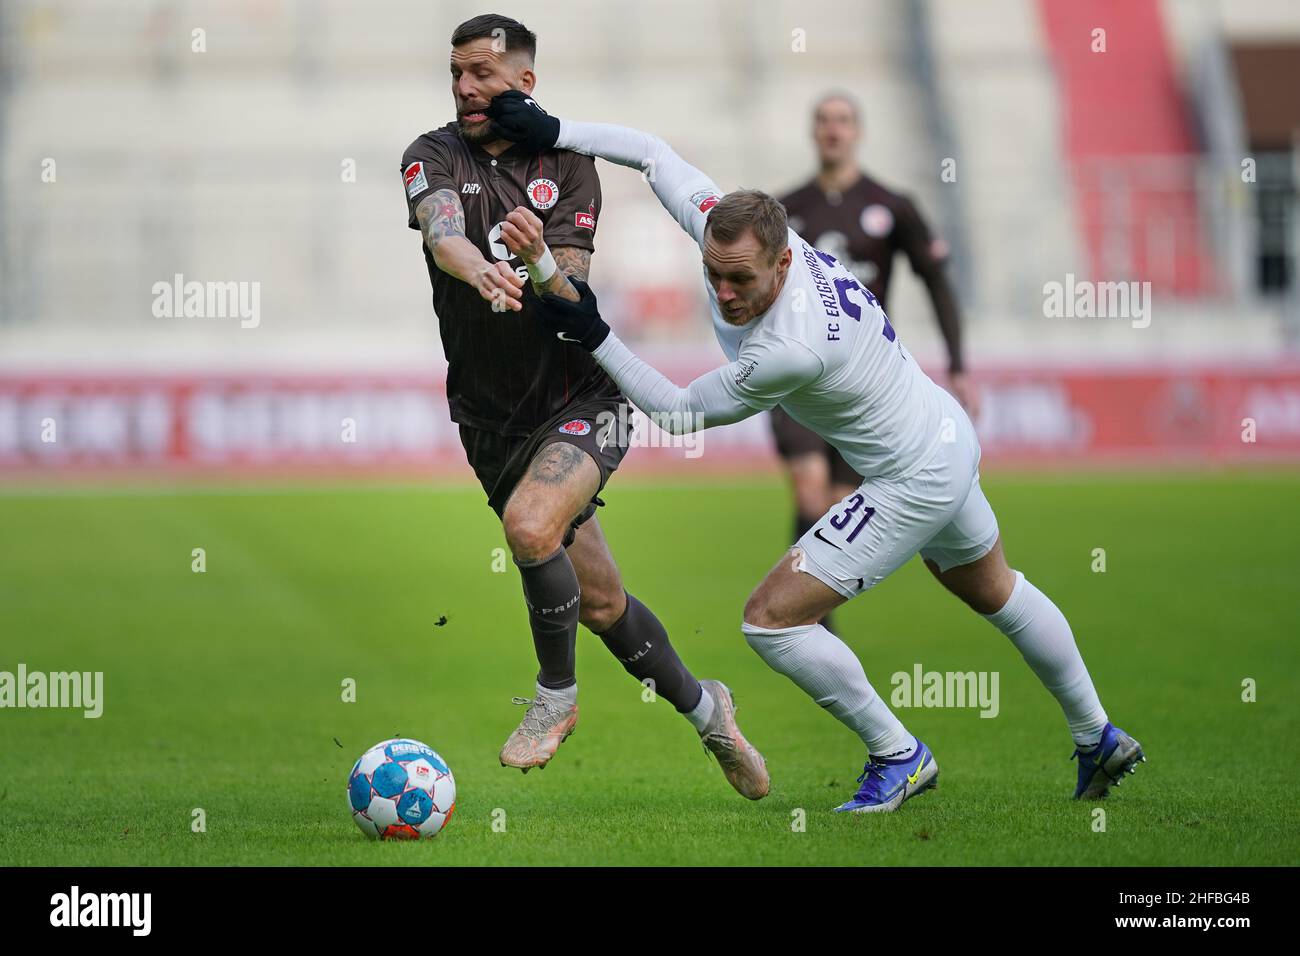 Hamburg, Germany. 15th Jan, 2022. Soccer: 2nd Bundesliga, Matchday 19, FC St. Pauli - Erzgebirge Aue, at Millerntor Stadium. St. Pauli's Guido Burgstaller (l) and Aue's Ben Zolinski. Credit: Marcus Brandt/dpa - IMPORTANT NOTE: In accordance with the requirements of the DFL Deutsche Fußball Liga and the DFB Deutscher Fußball-Bund, it is prohibited to use or have used photographs taken in the stadium and/or of the match in the form of sequence pictures and/or video-like photo series./dpa/Alamy Live News Stock Photo